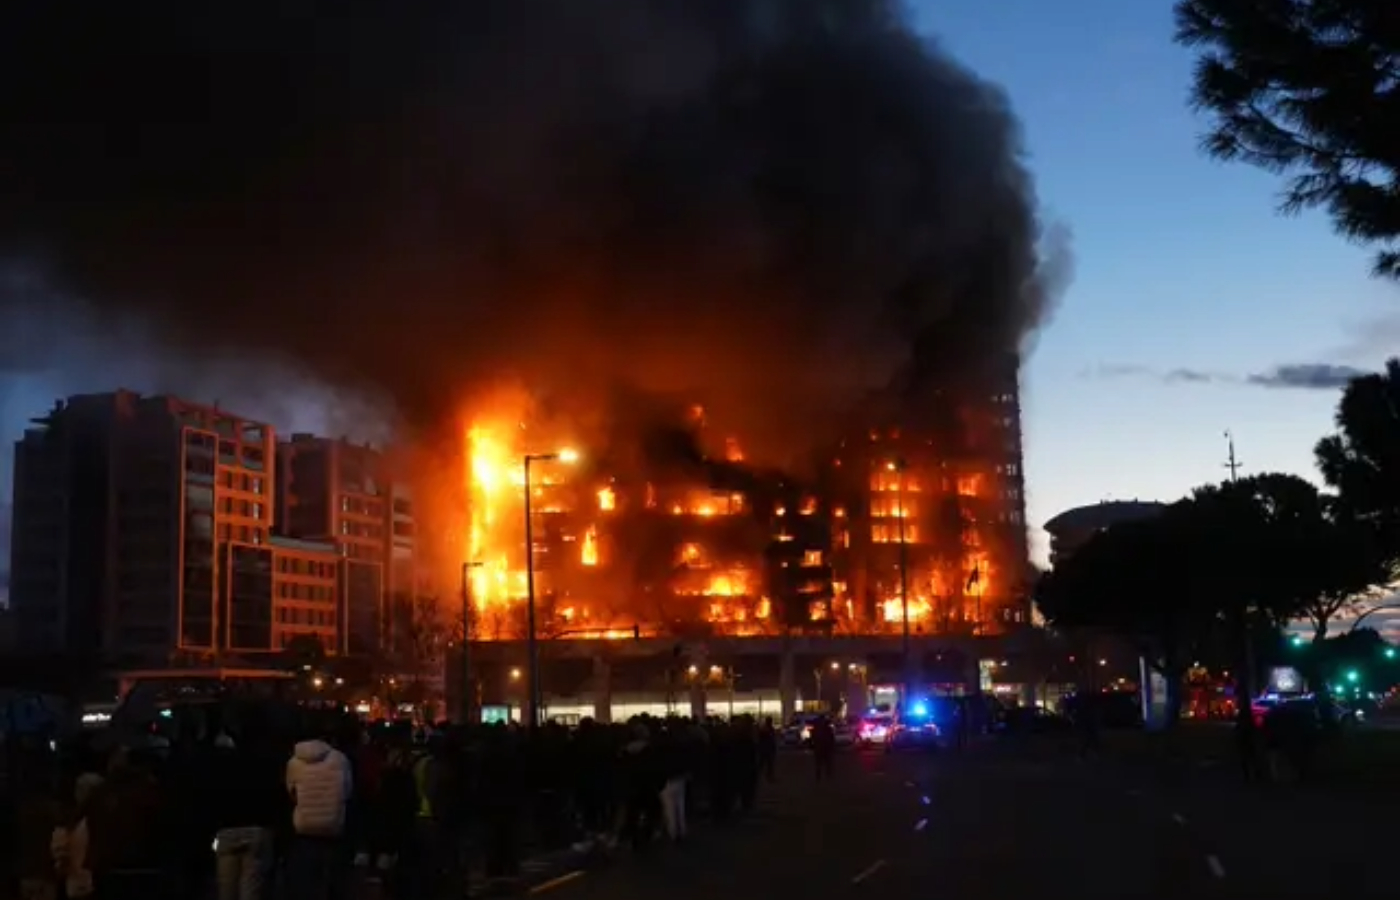 The fire began in the early evening and spread to an adjacent building, state news agency Efe reported. Photo: Alberto<em> </em>Saiz/AP.”/><cite class=cite>Alberto Saiz/AP</cite></div><figcaption aria-hidden=true>The fire began in the early evening and spread to an adjacent building, state news agency Efe reported. Photo: Alberto<em> </em>Saiz/AP. <cite class=hidden>Alberto Saiz/AP</cite></figcaption></figure><p>The fire sent clouds of black smoke billowing skywards that could be seen from afar. Spain’s weather agency, Aemet, reported winds of up to 40mph at the time.</p><p>The fire began in the early evening and spread to an adjacent building, state news agency Efe reported.</p><p>Initial emergency service reports said there were at least 13 people injured with fractures, burns and smoke inhalation. The 13 included six firefighters.</p><p>Spanish Prime Minister Pedro Sanchez posted on X saying he was “shocked by the terrible fire in a building in Valencia” adding that he had offered the city “all the help that is necessary”.</p><p>“I want to convey my solidarity to all the people affected and recognition to all the emergency personnel already deployed at the scene,” Mr Sanchez said.</p><div class=